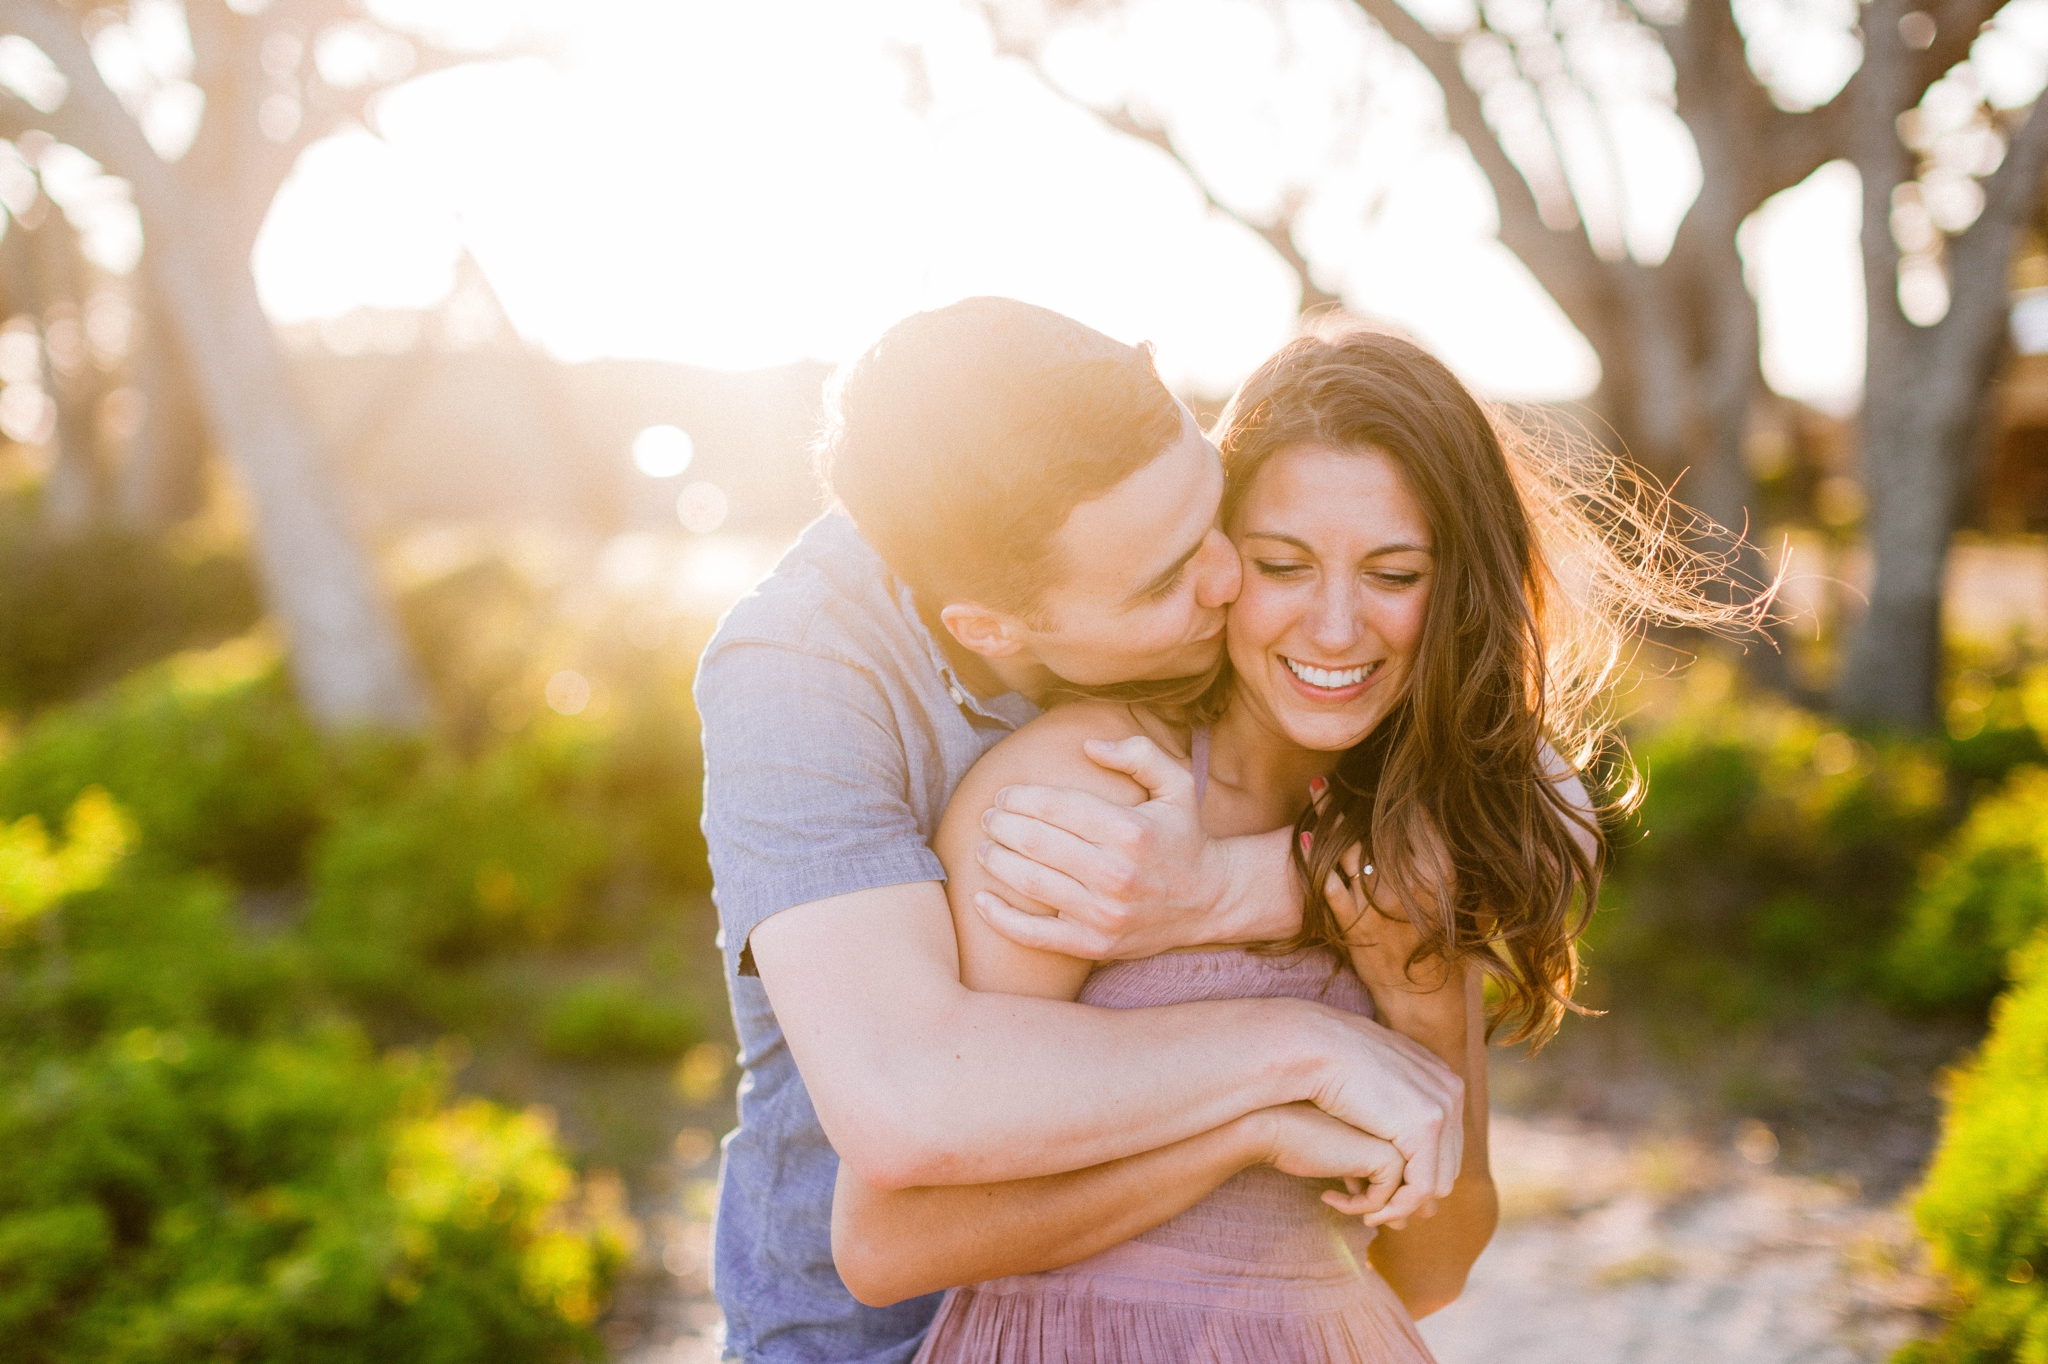  Guy kissing a girl in front of live oak trees with the sunset behind them - Woman is in a flowy pastel maxi dress - outdoor golden light session - engagement photographer in honolulu, oahu, hawaii - johanna dye photography 